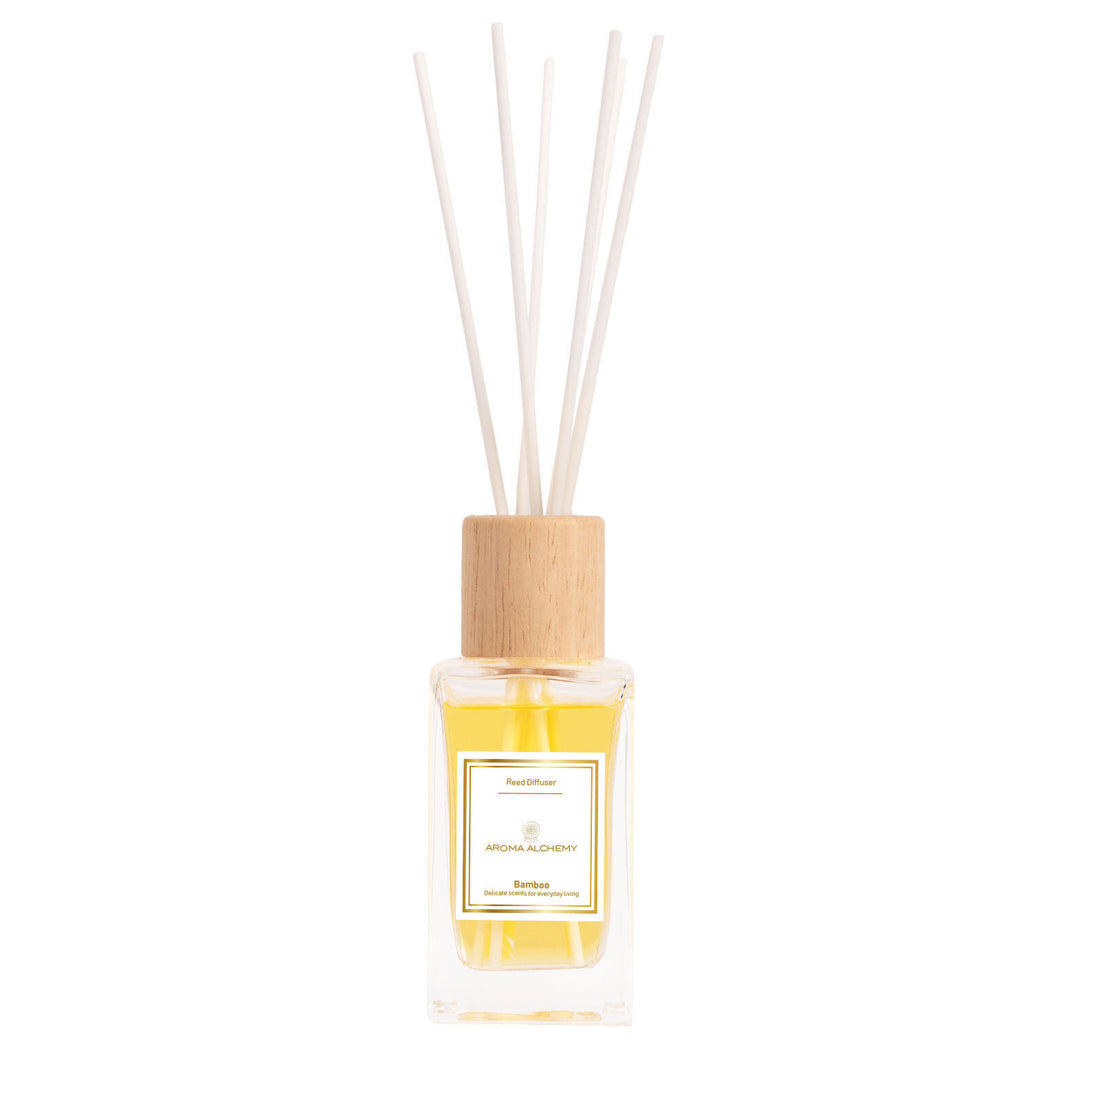 PureSpa Reed Diffuser Aromatherapy Home Fragrance-Home Fragrances-PEROZ Accessories